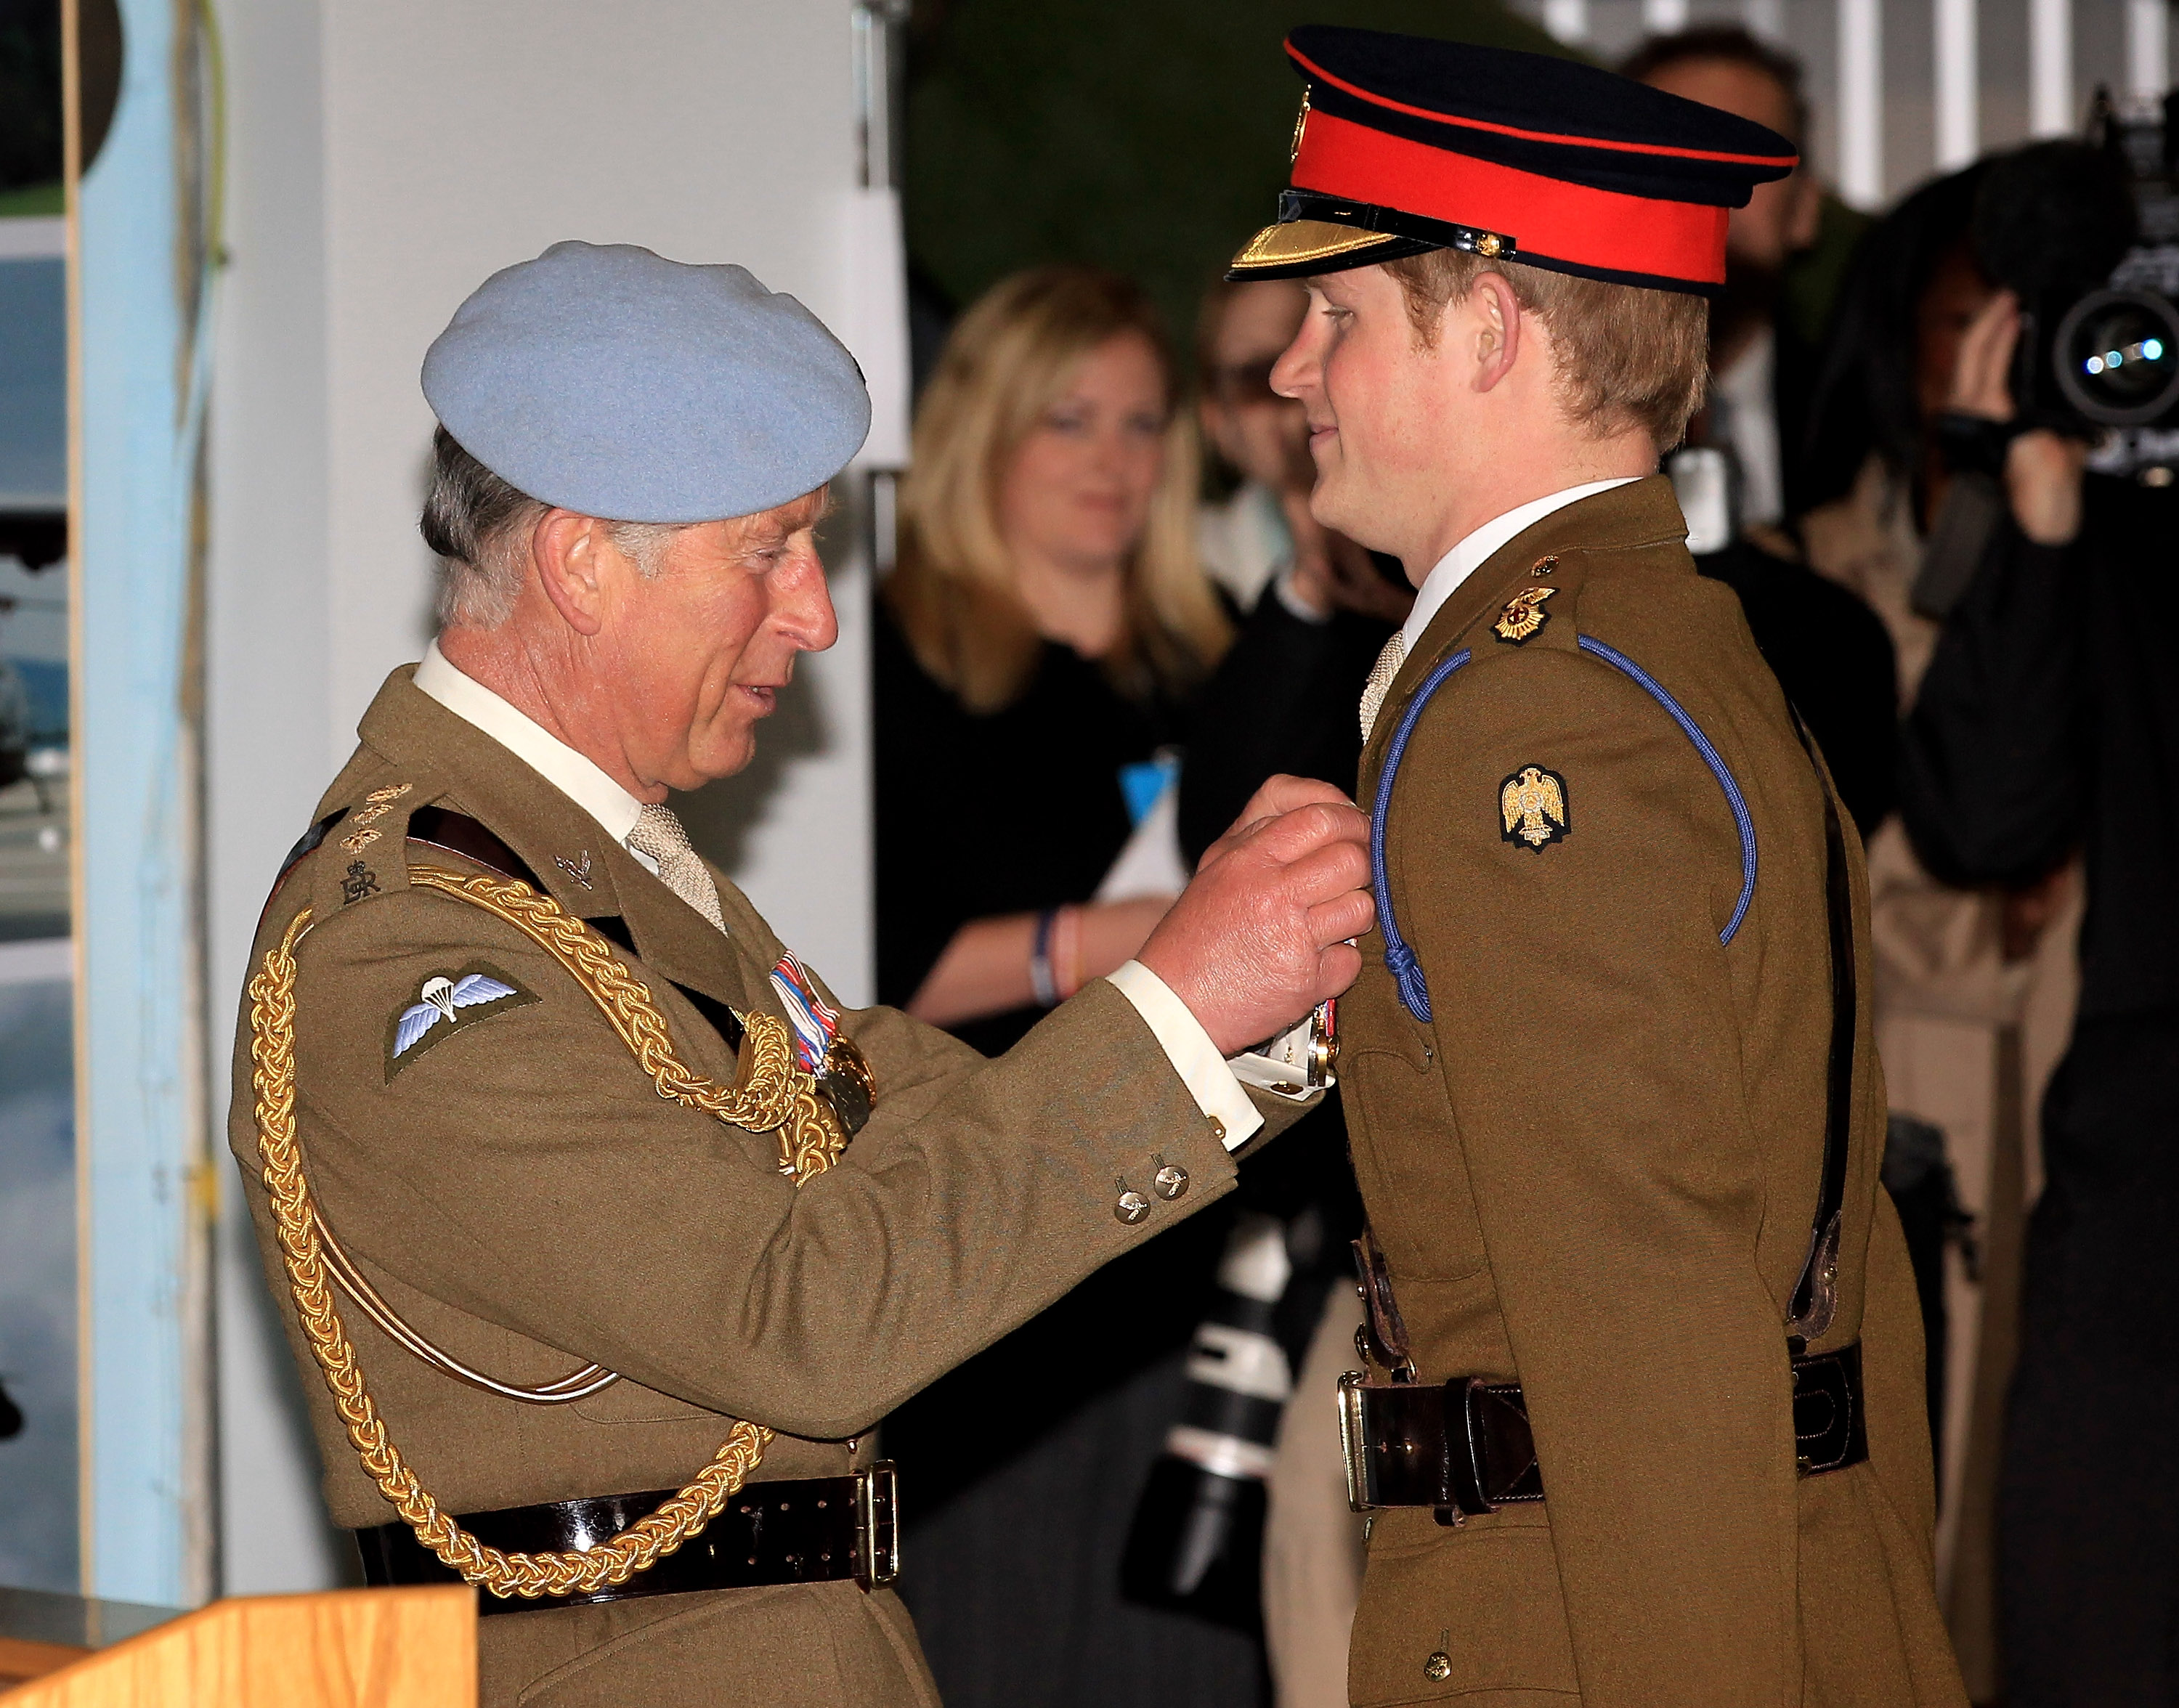 Prince Charles presents his son Prince Harry with his flying wings at Prince Harry's pilot course graduation at the Army Aviation Centre on May 7, 2010 in Andover, England | Source: Getty Images